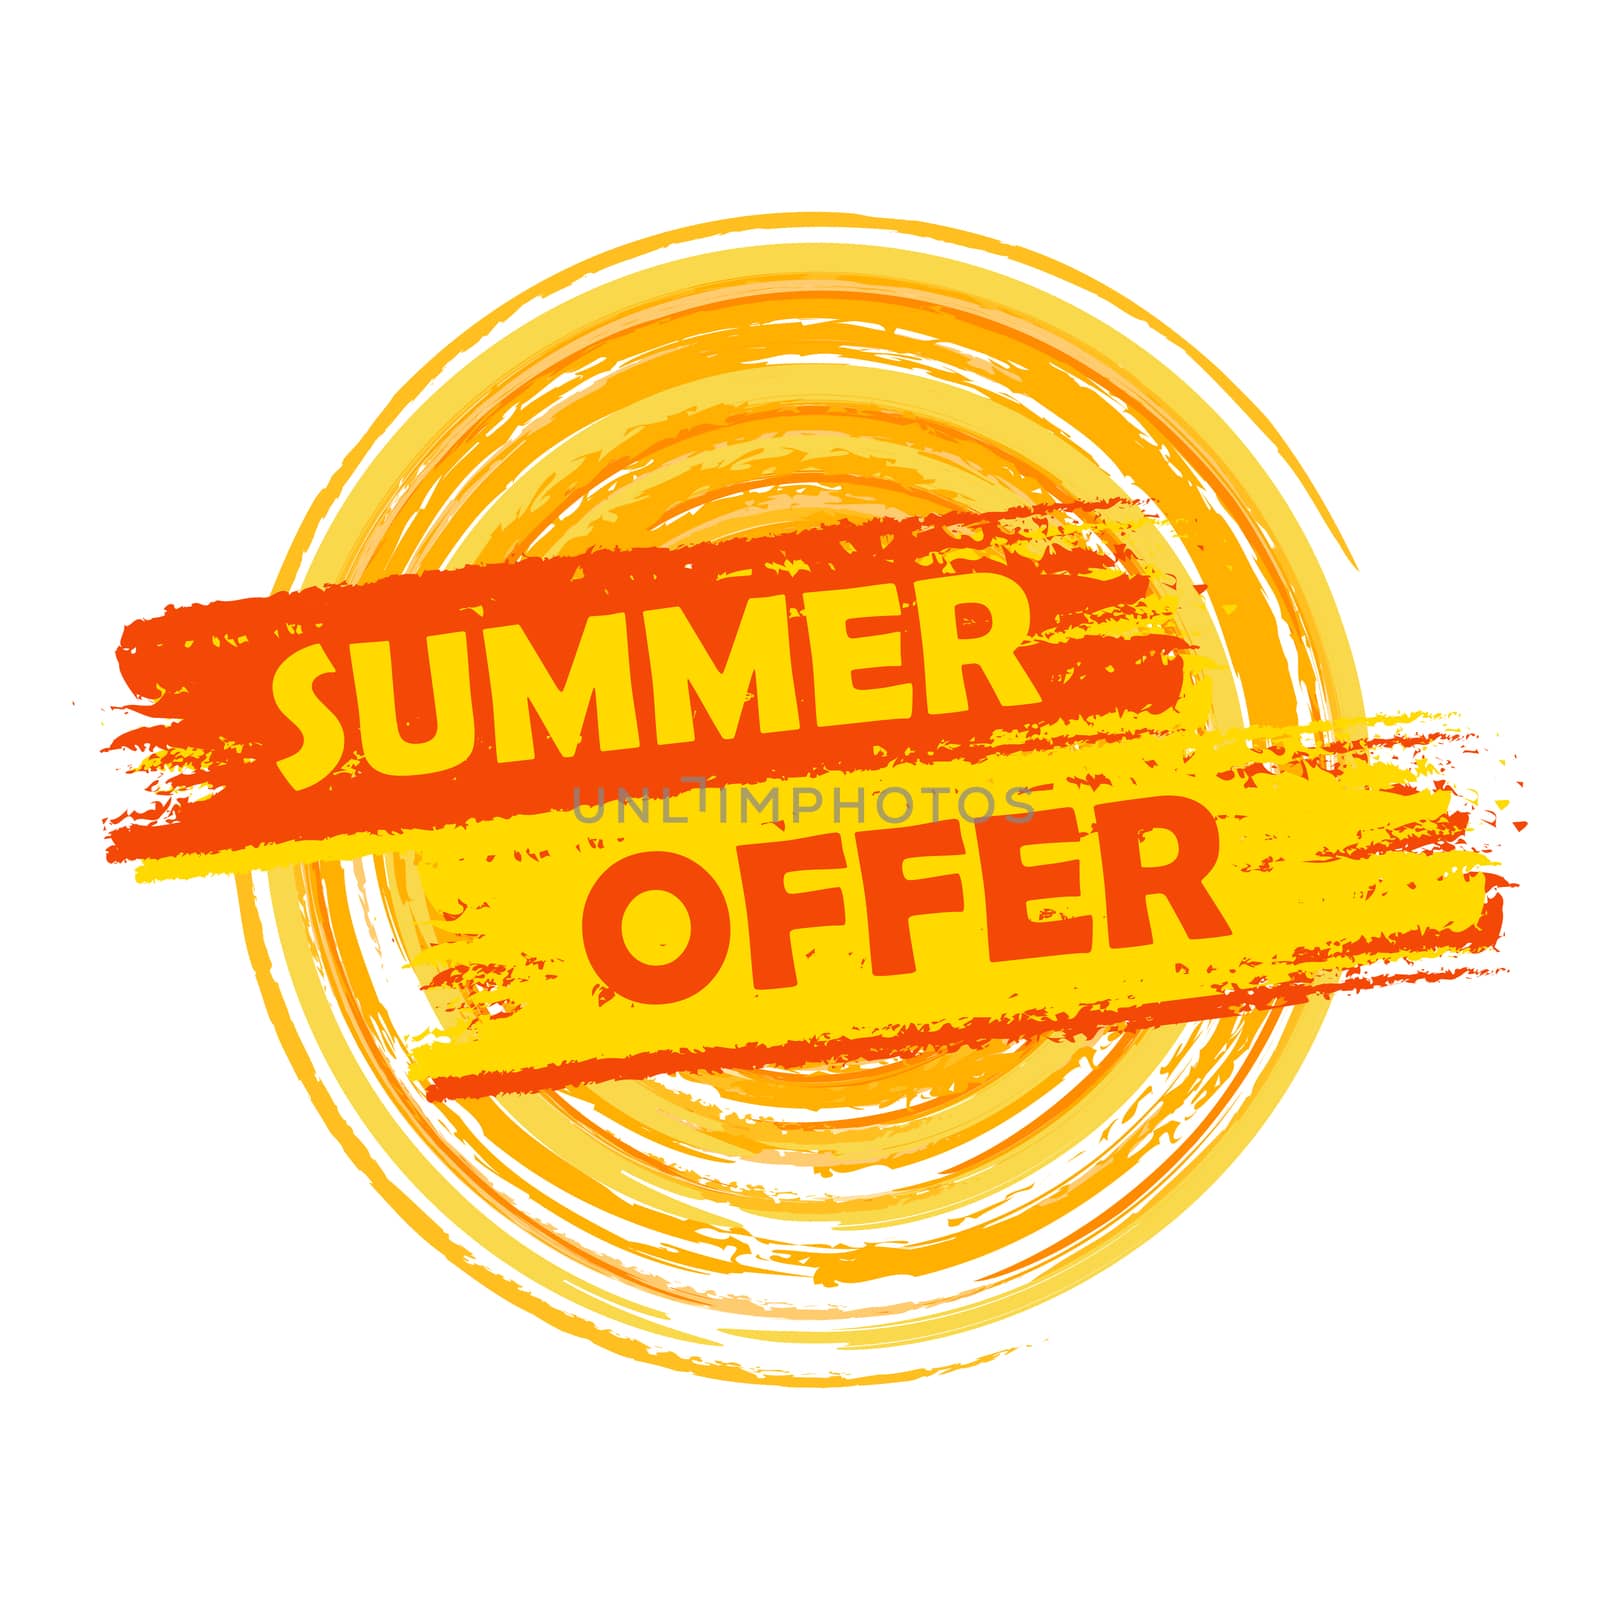 summer offer banner - text in yellow and orange drawn label with sun symbol, business seasonal shopping concept